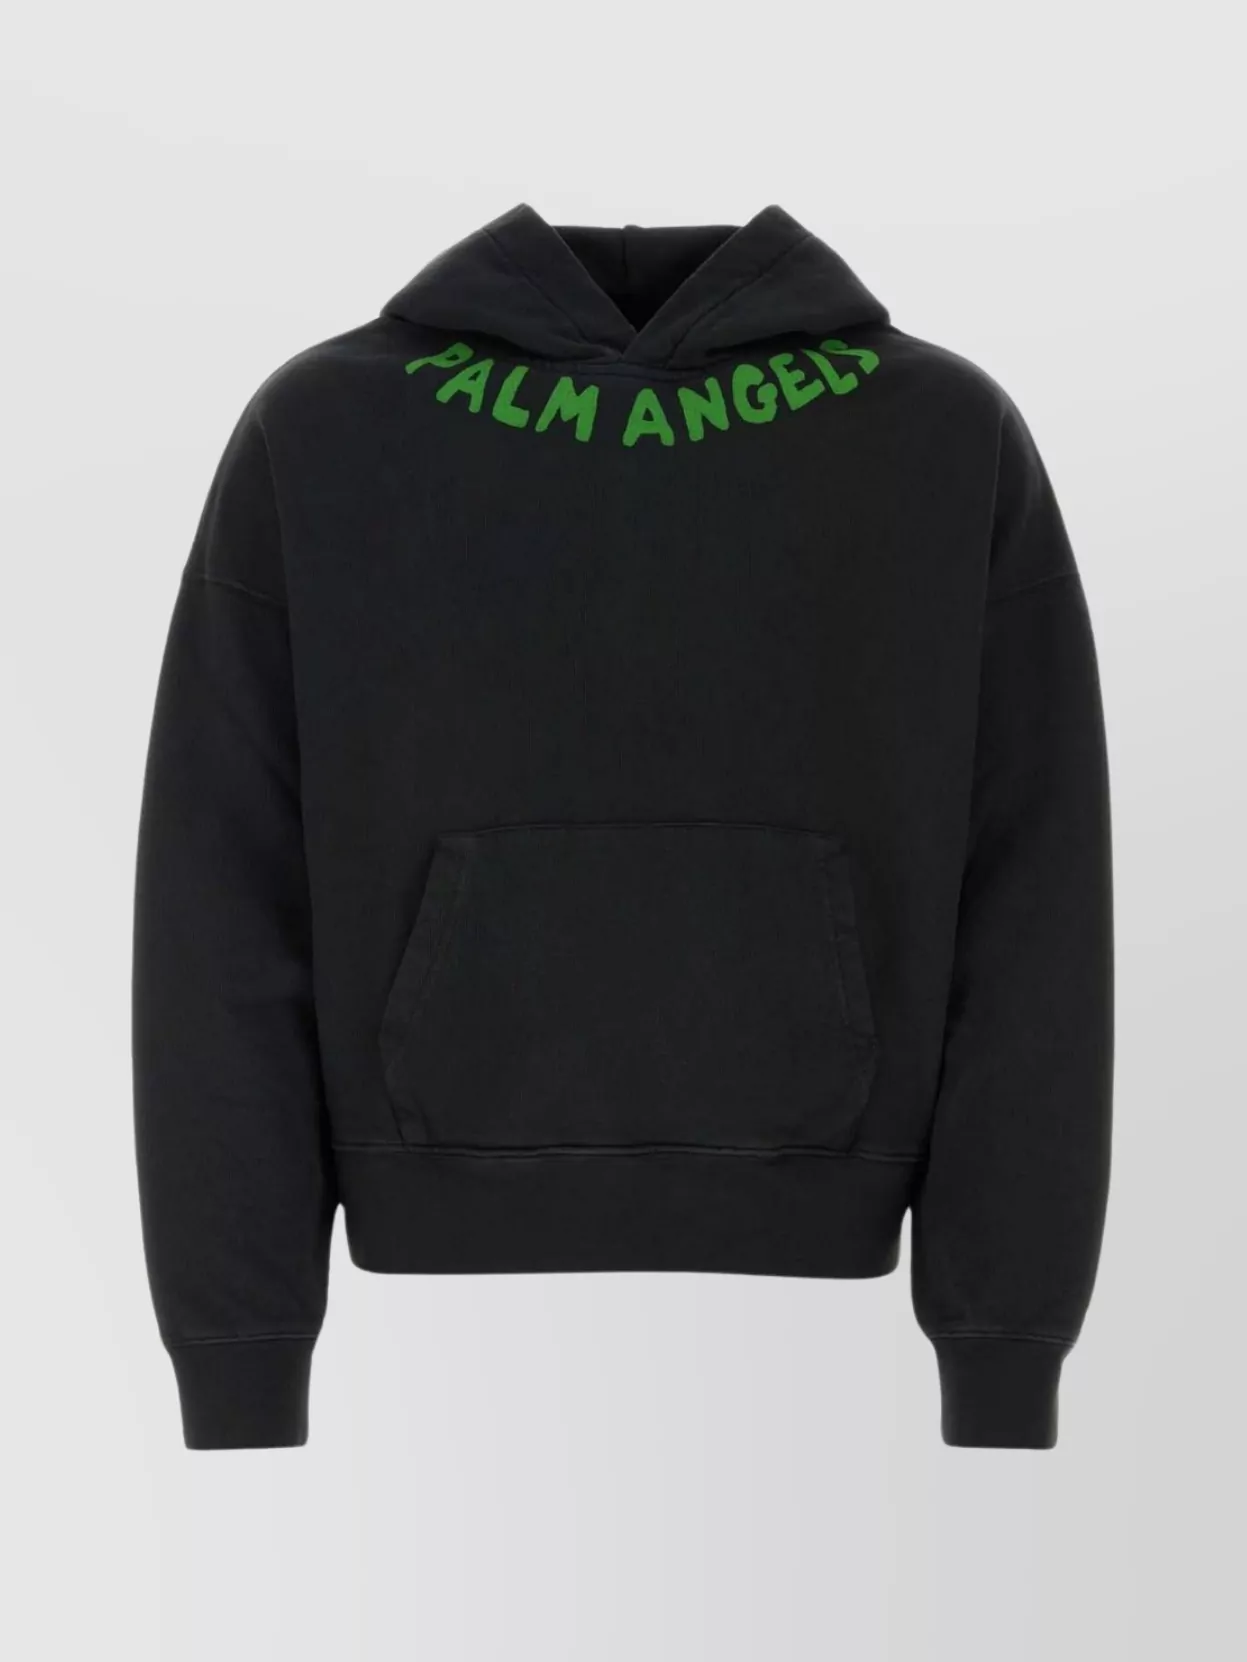 PALM ANGELS COTTON SWEATSHIRT WITH HOOD AND POCKET